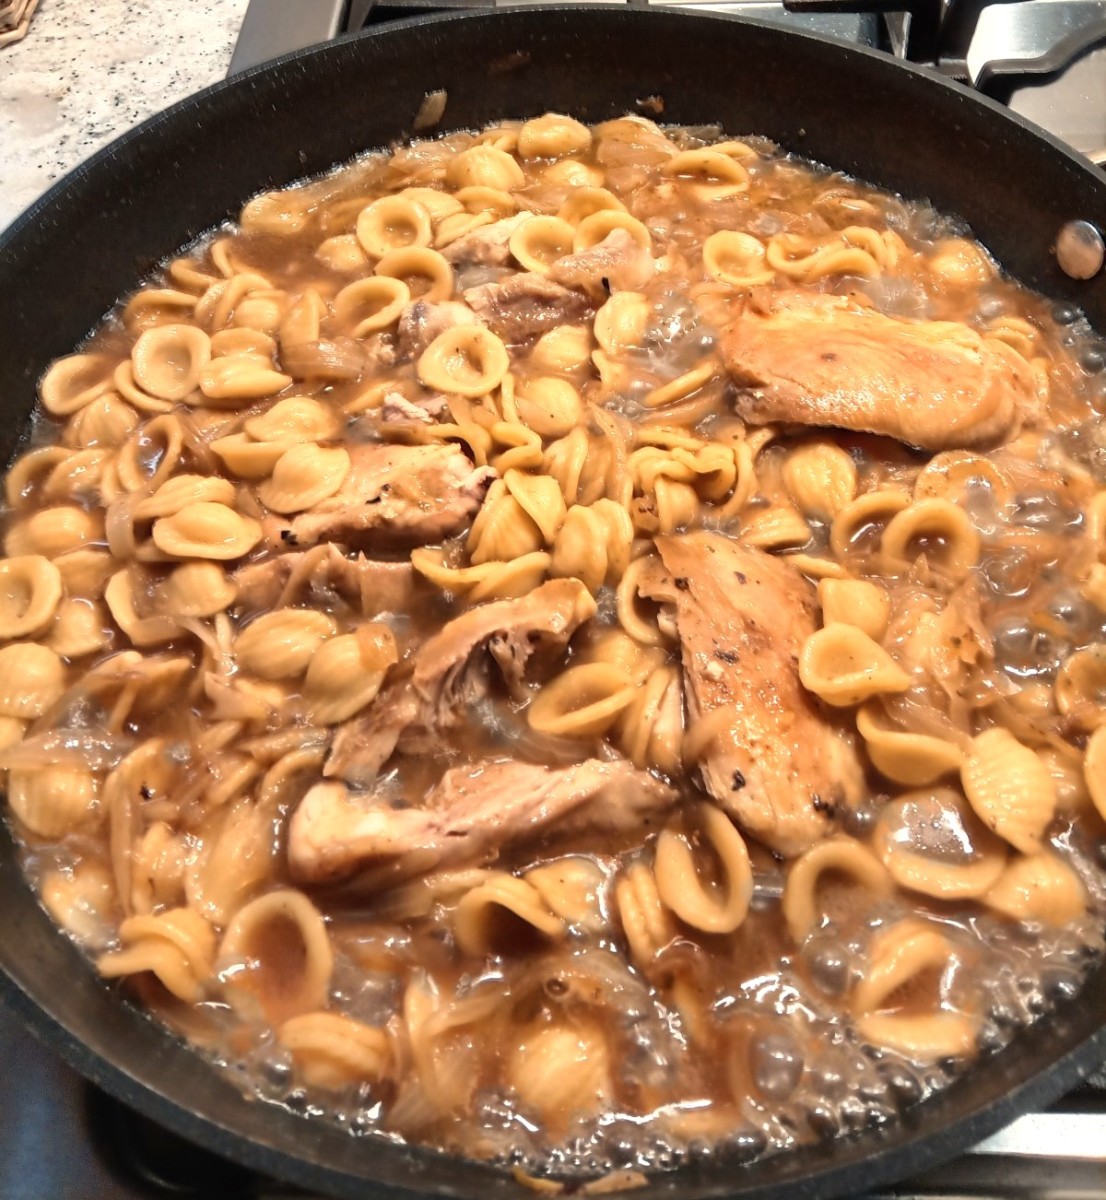 Pasta is cooked and the chicken is nestled back into the pan, ready to serve